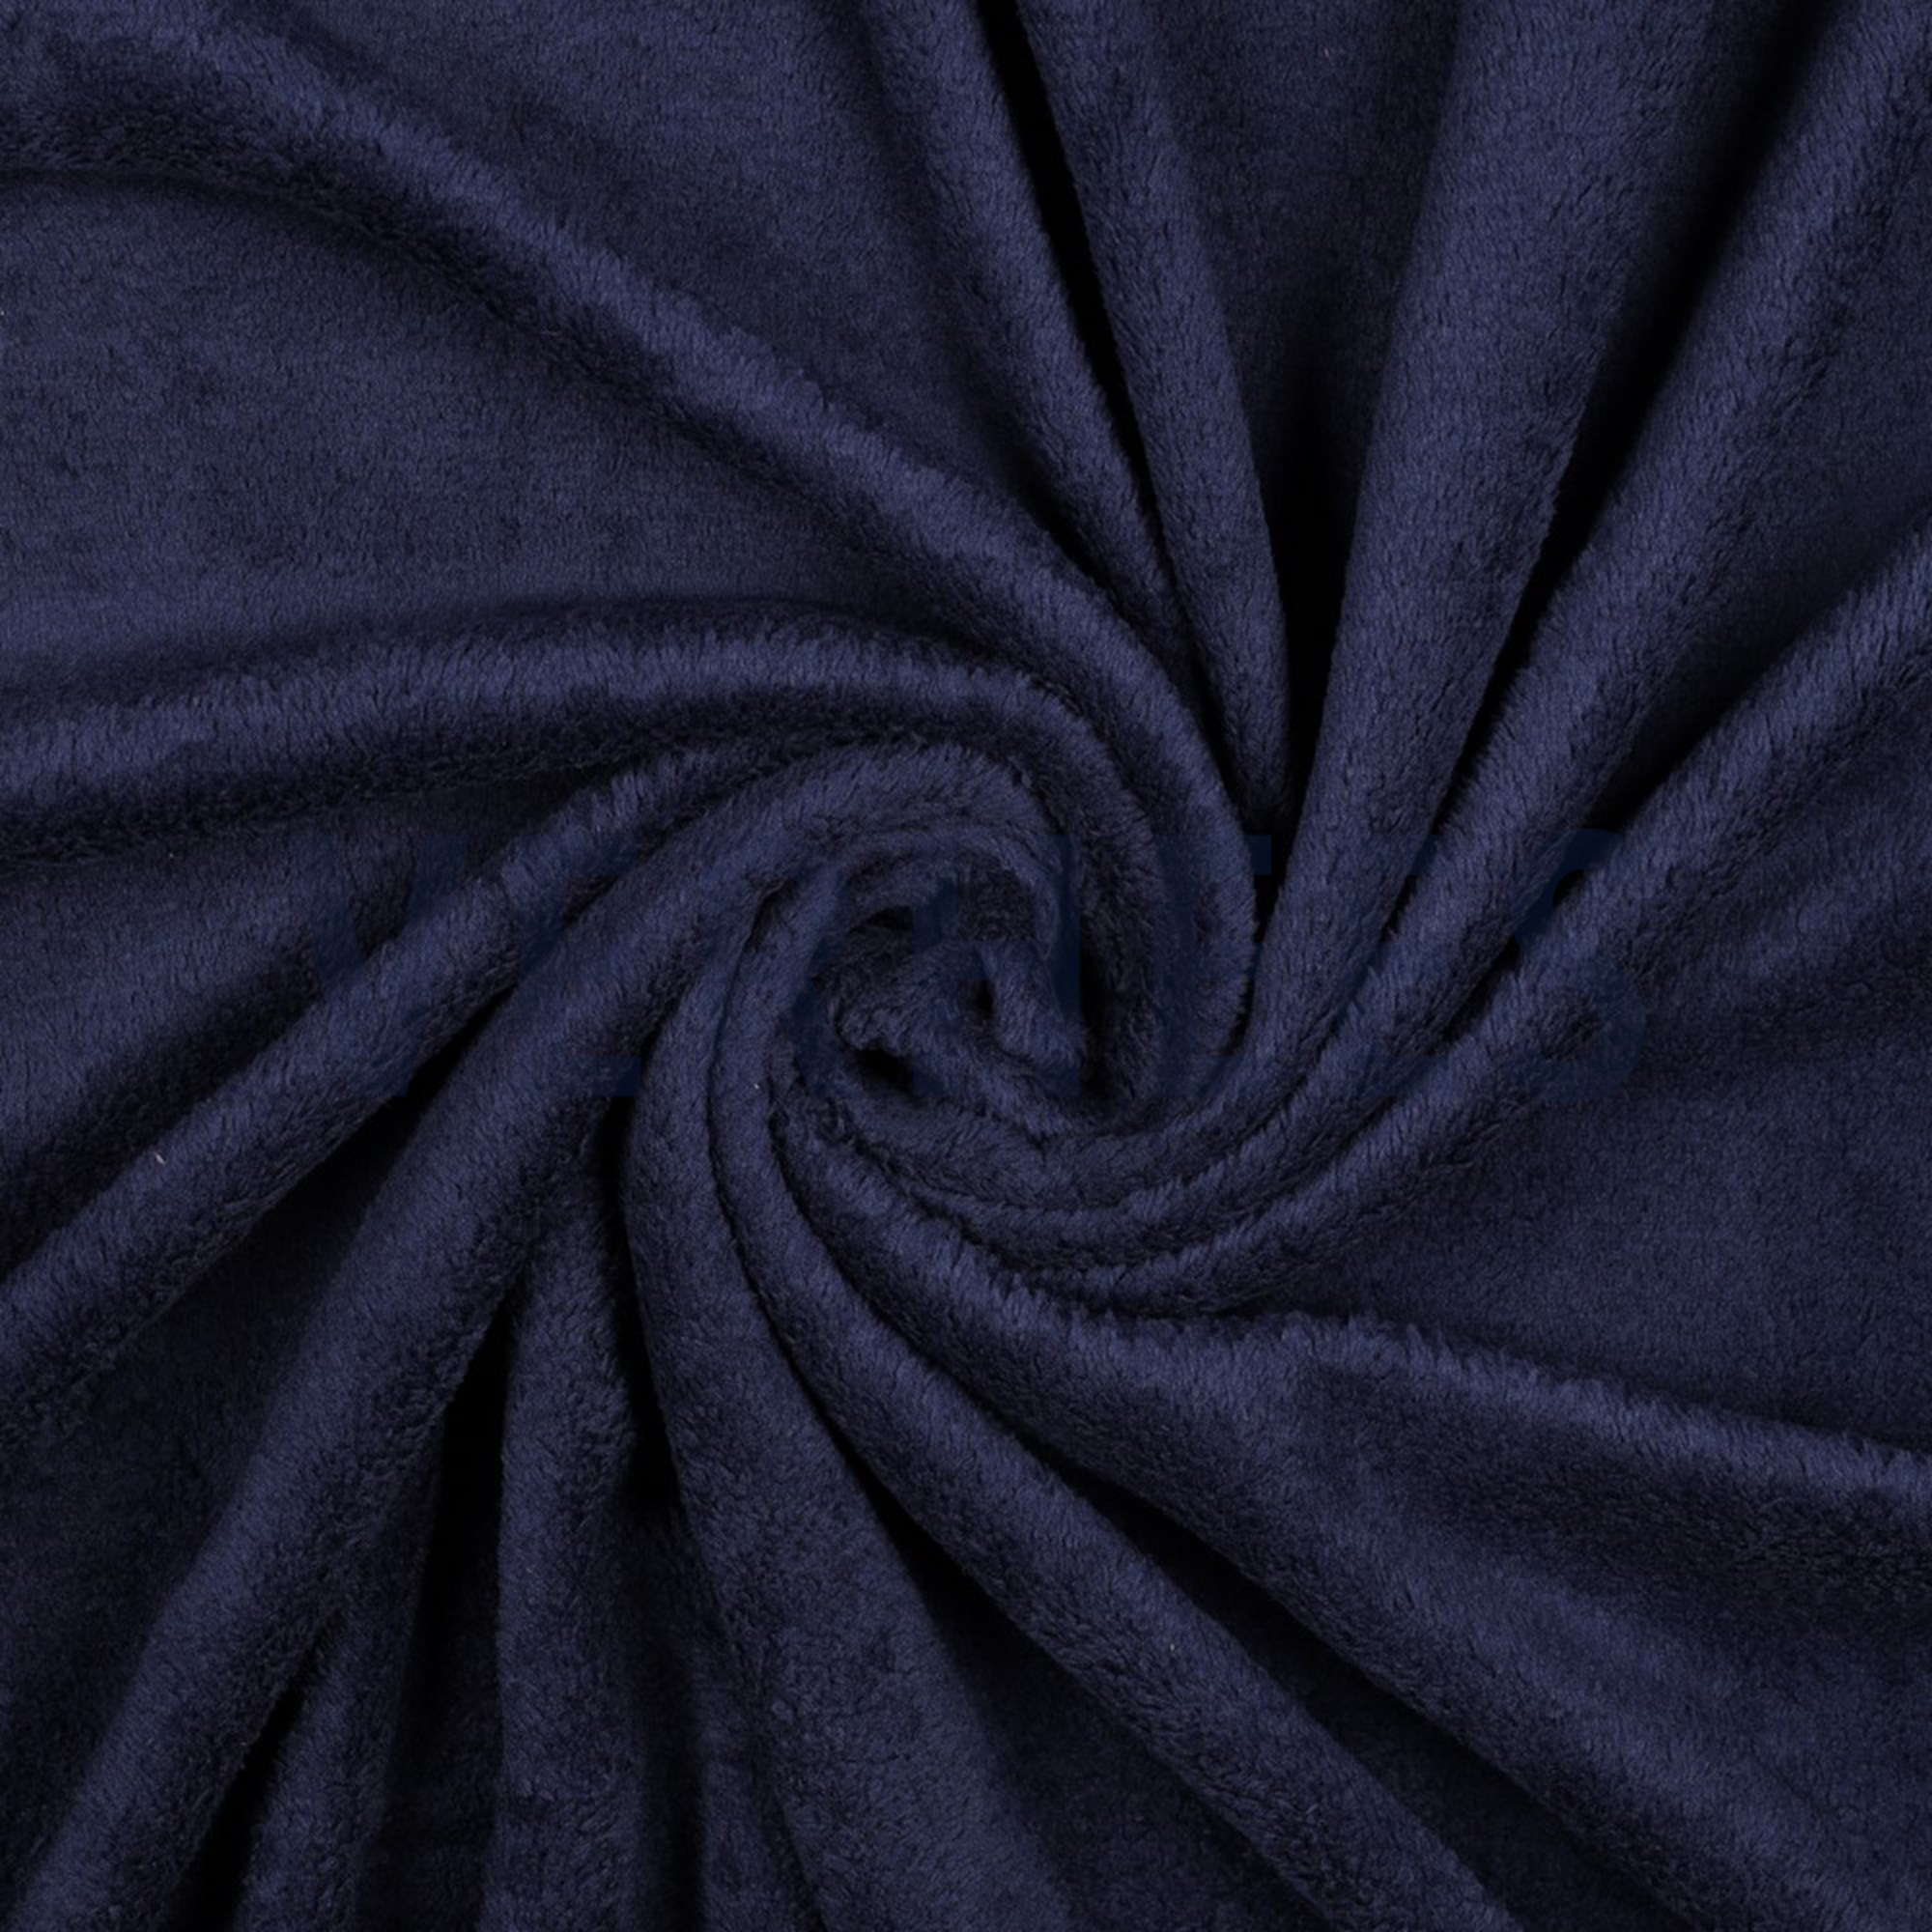 DOUBLE SIDED MICRO NAVY (high resolution) #2